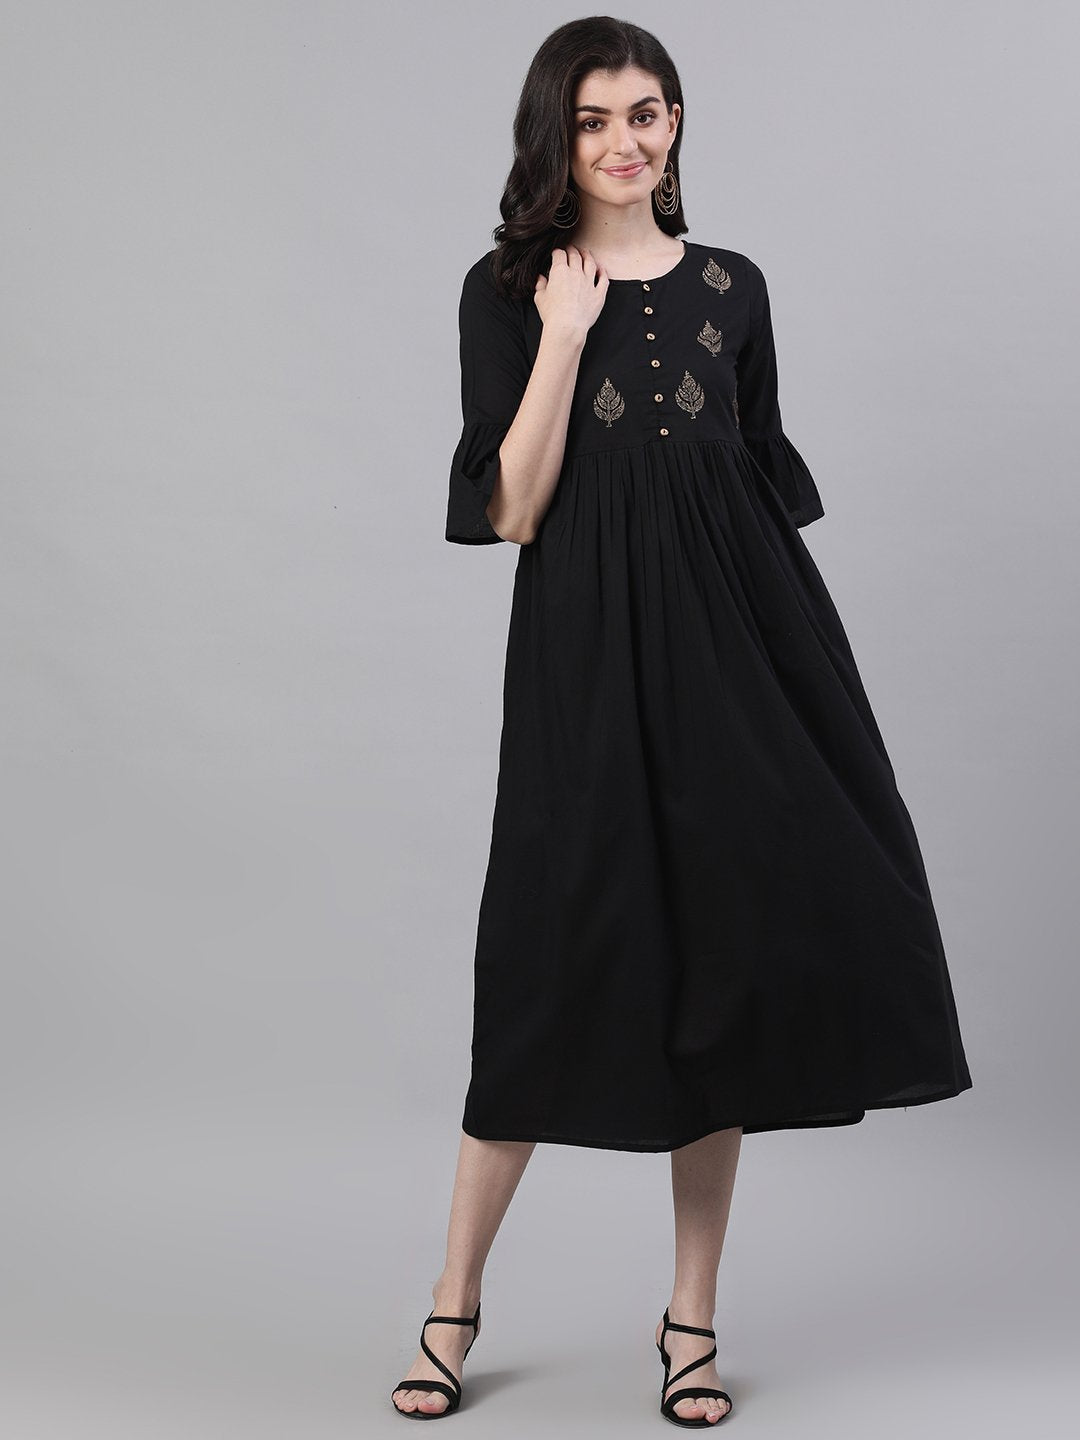 Women's Black Solid Solid Round Neck Cotton Maxi Dress - Nayo Clothing